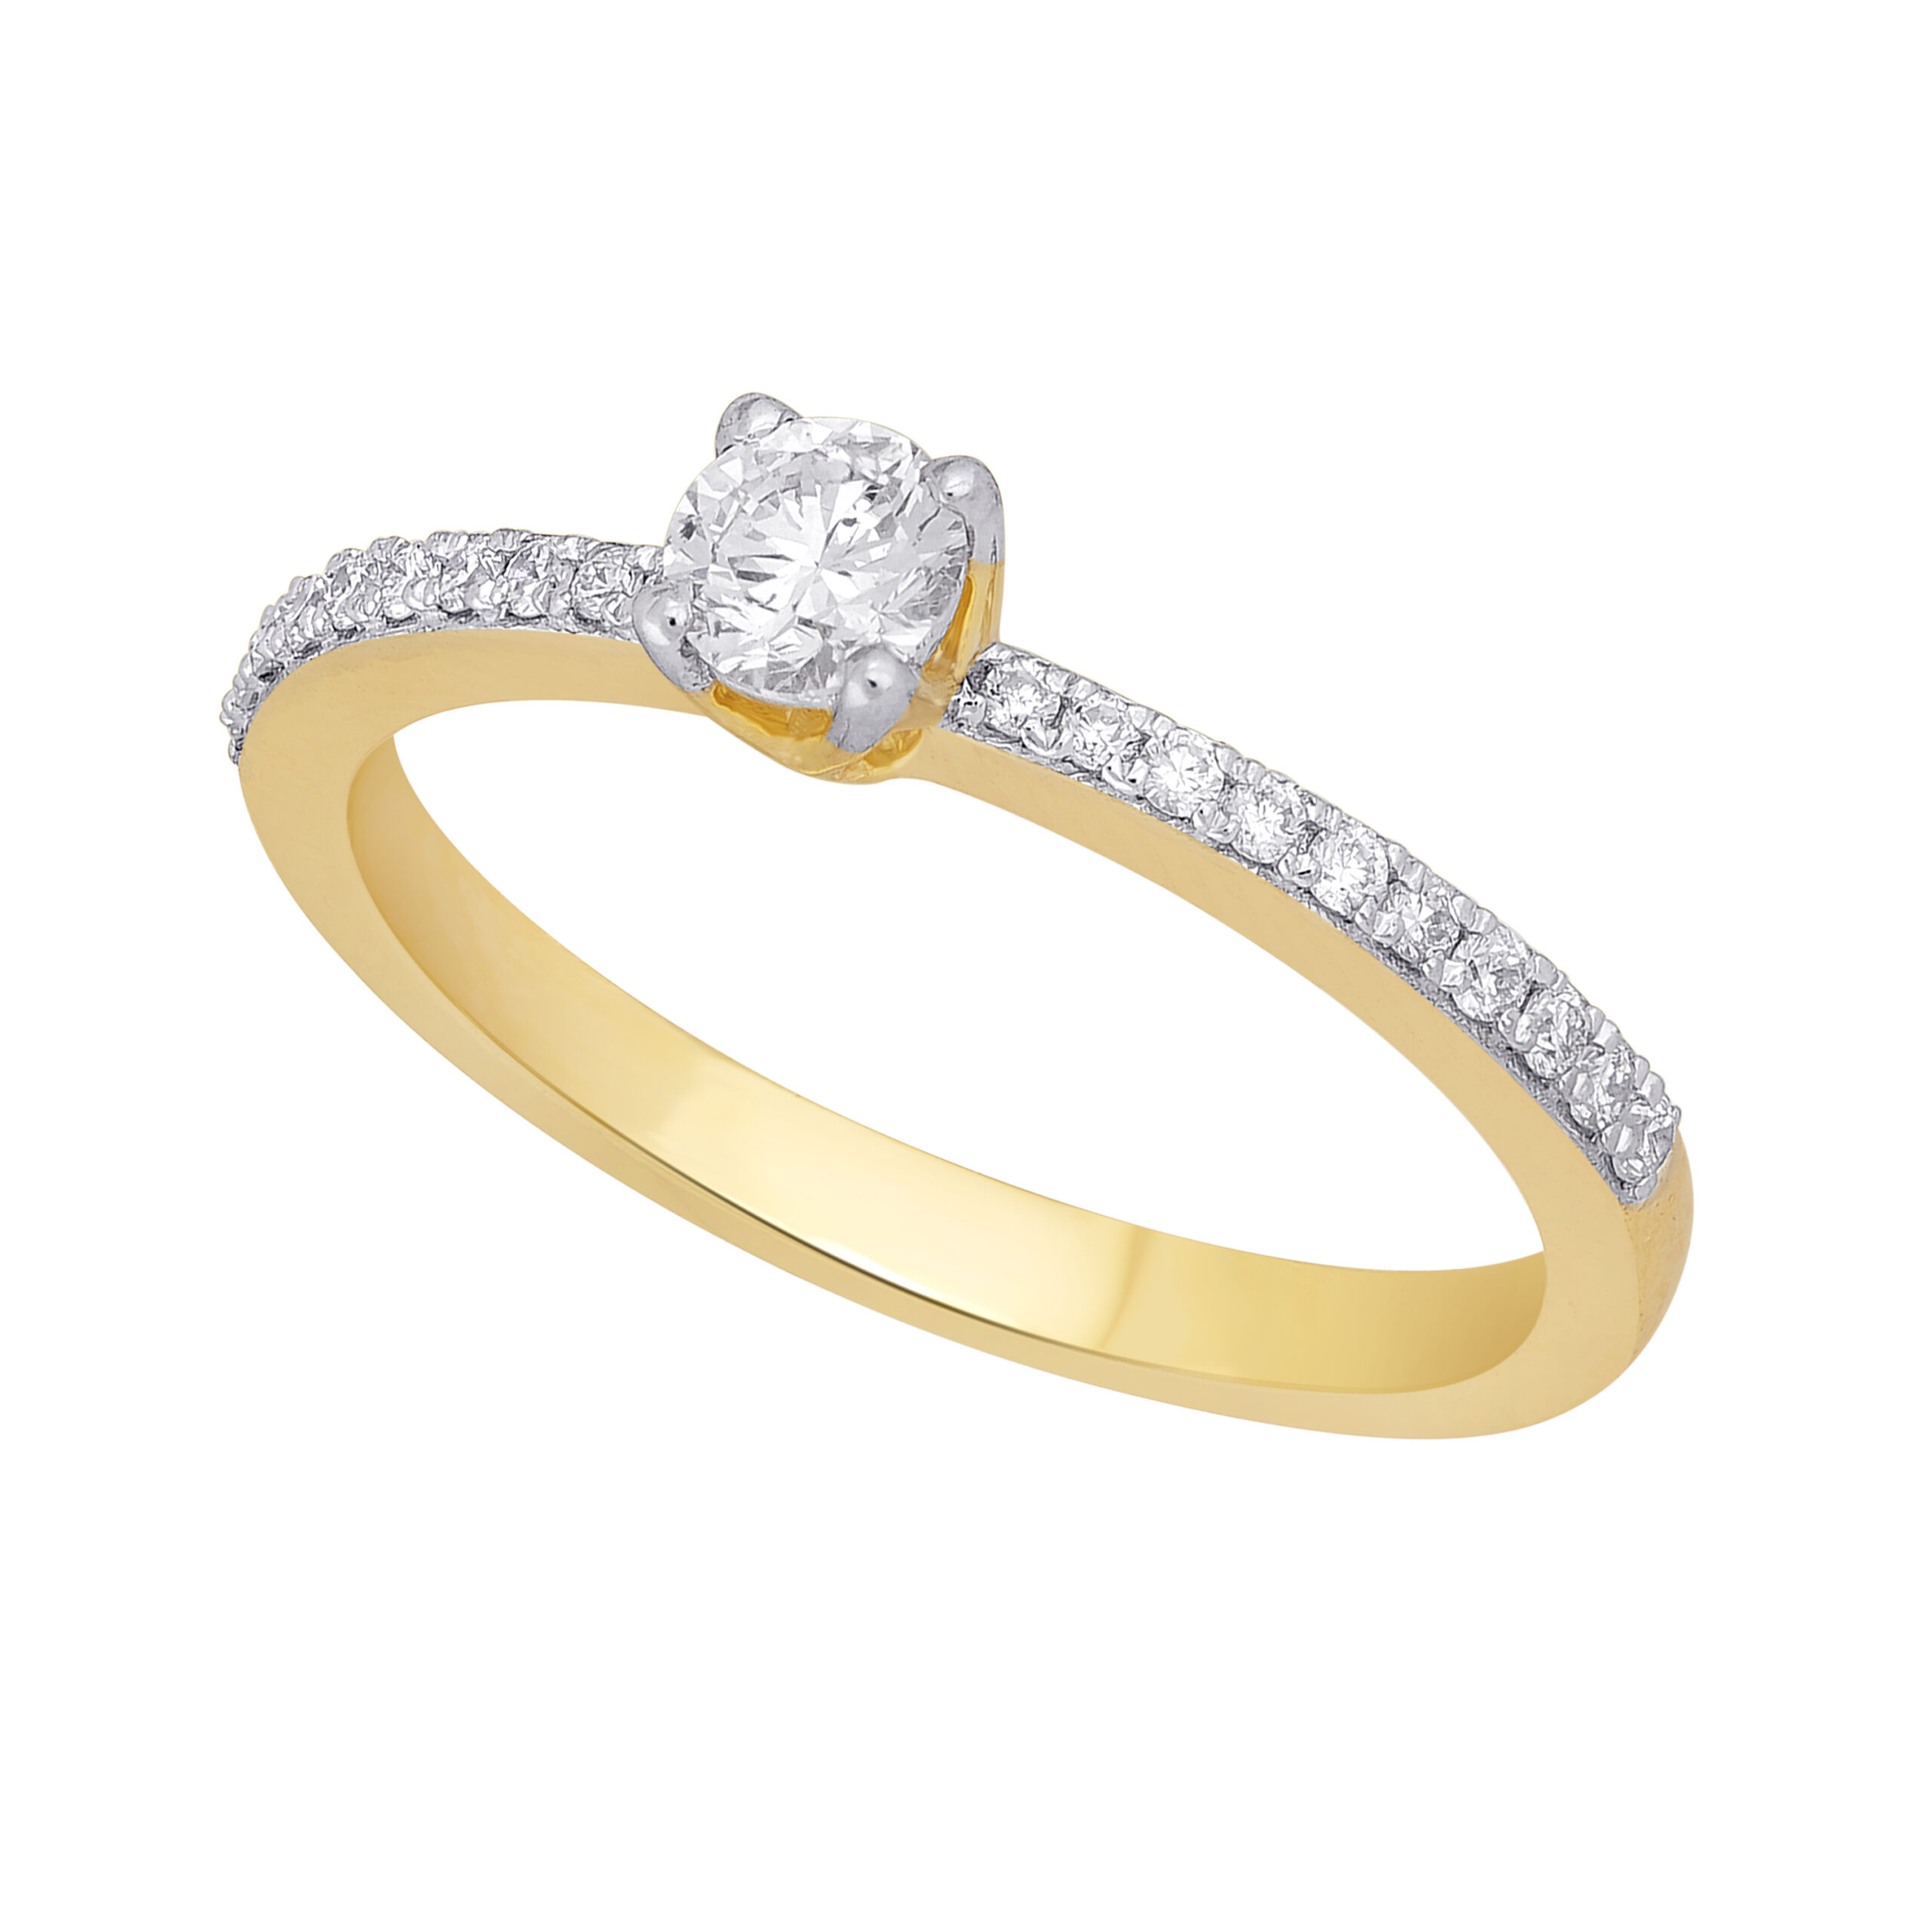 Clear Carats CC solitairering i 14 kt guld og 0.36 ct. diamanter - CLEAR